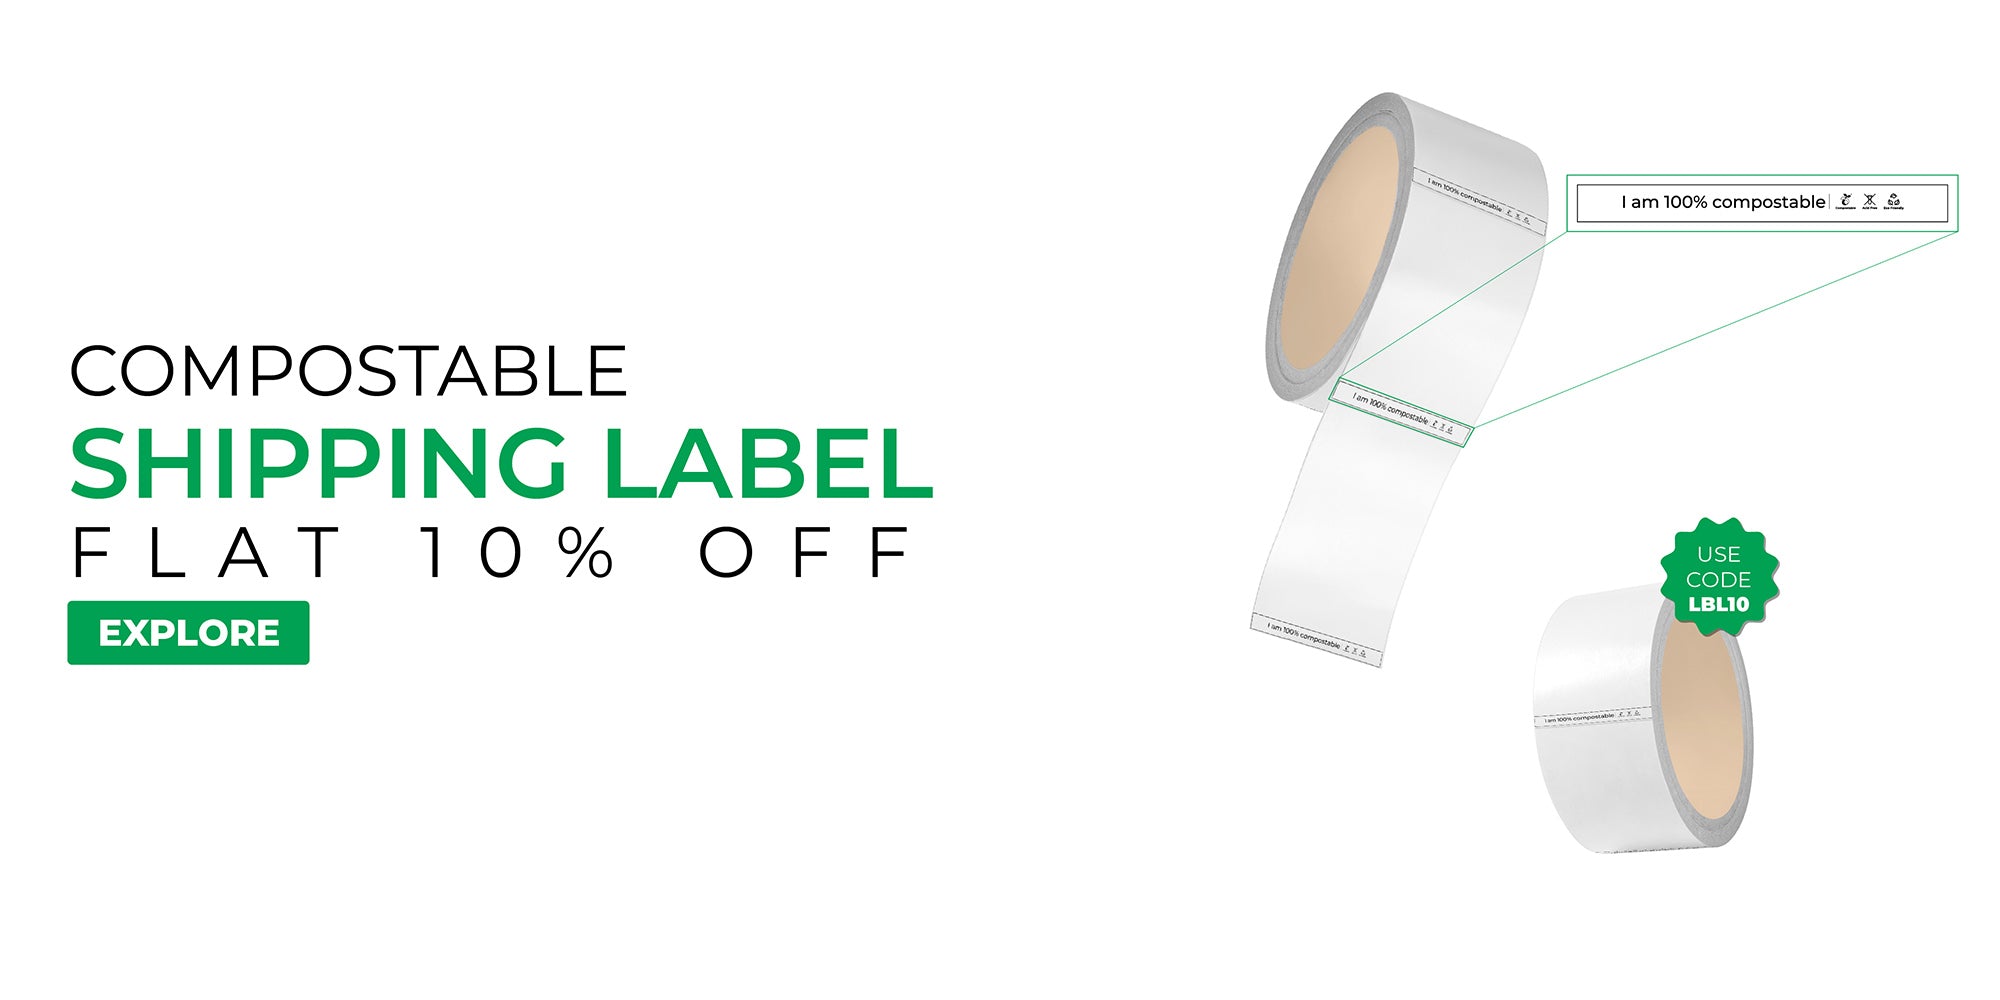 Compostable Shipping Label